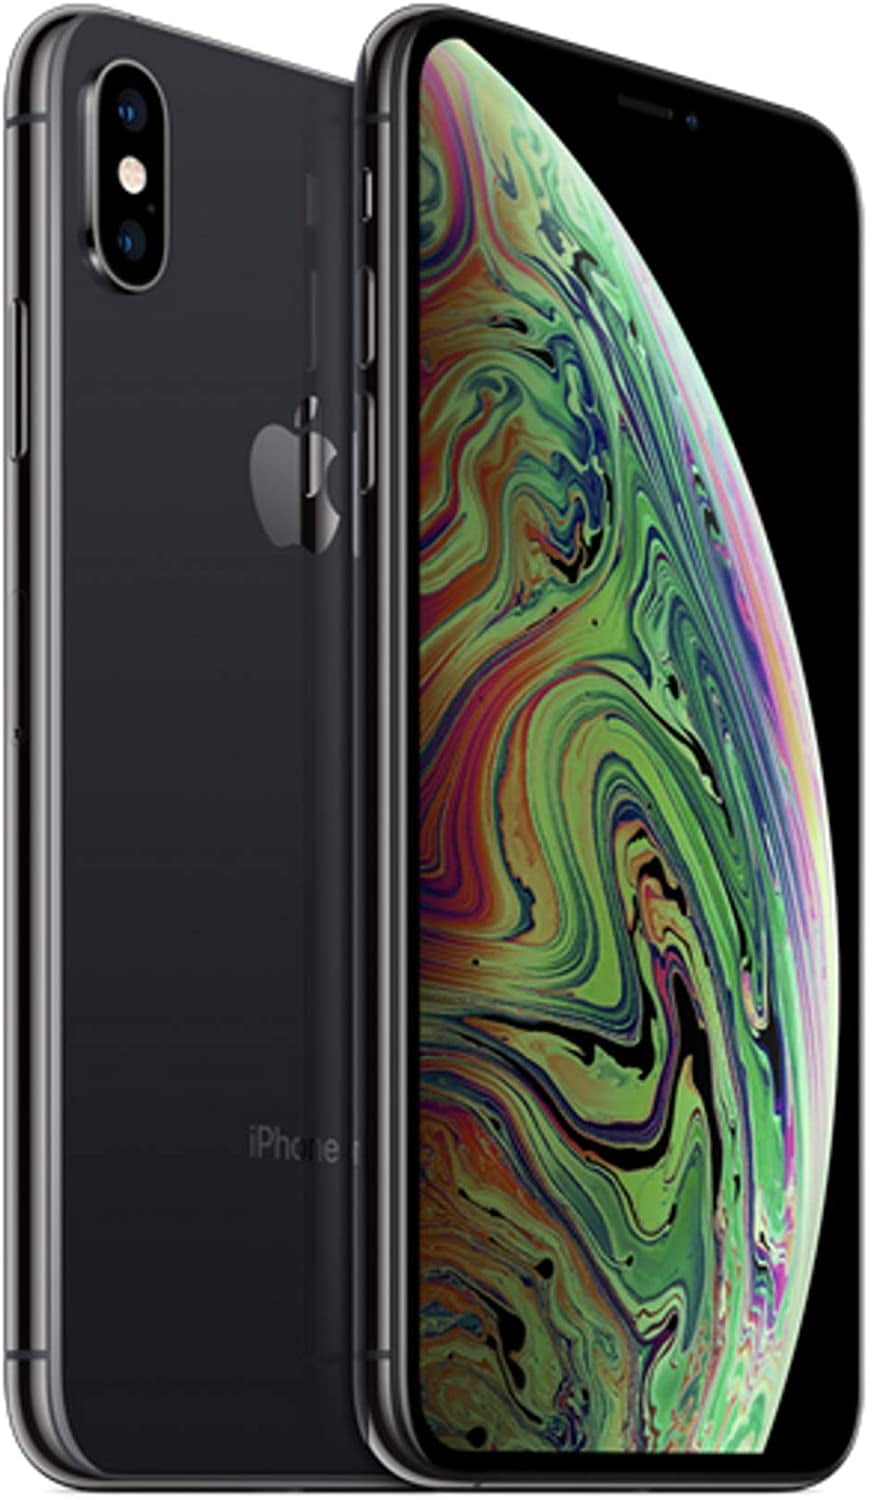 Apple iPhone XS Fully Unlocked, Space Gray 256GB (Certified 